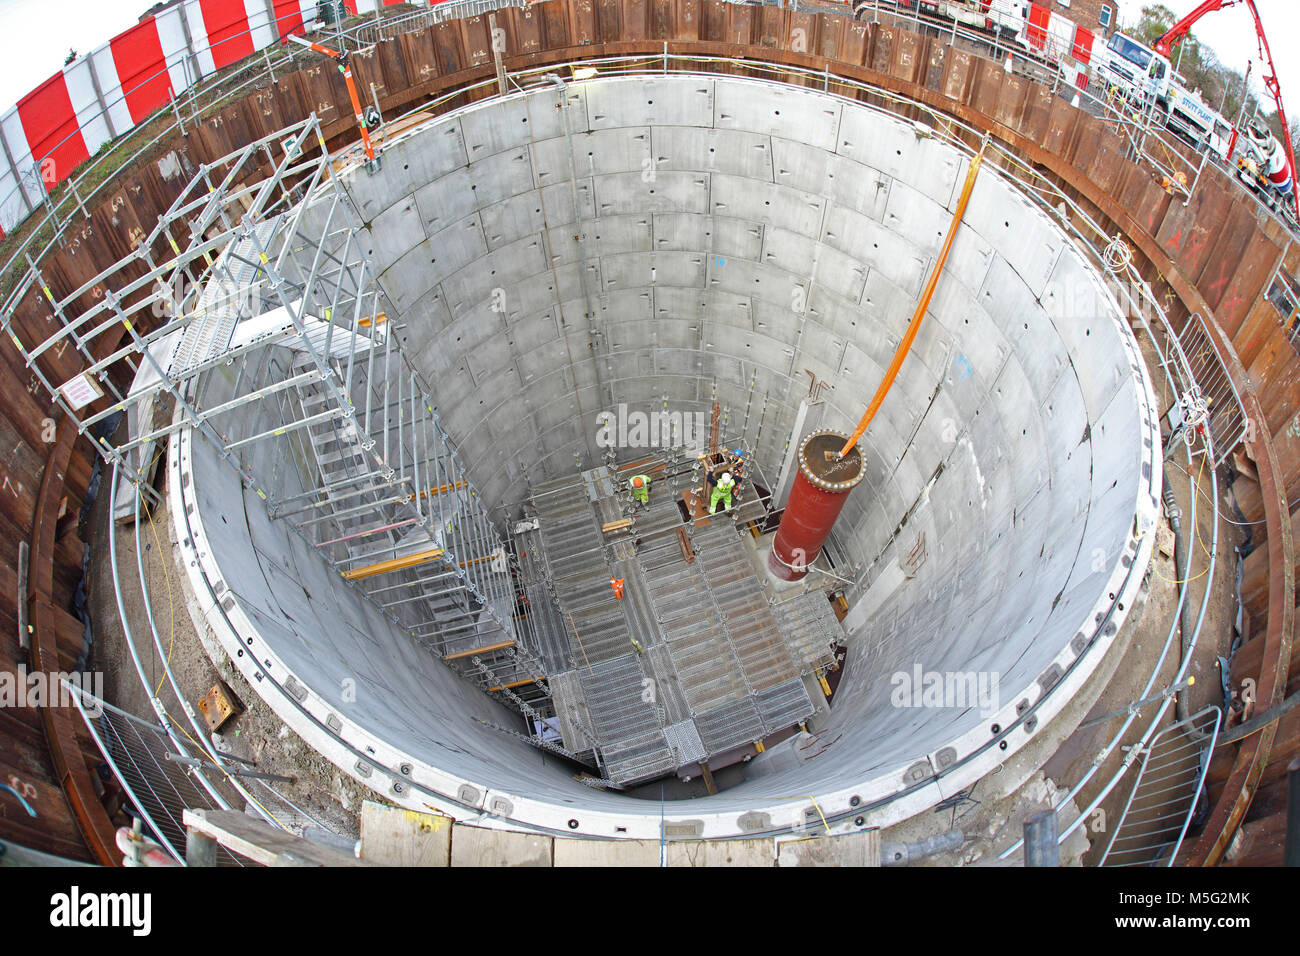 A large, circular shaft under construction as part of a major new storm drain project in Manchester, UK. Shows scaffolding and temporary staircase. Stock Photo